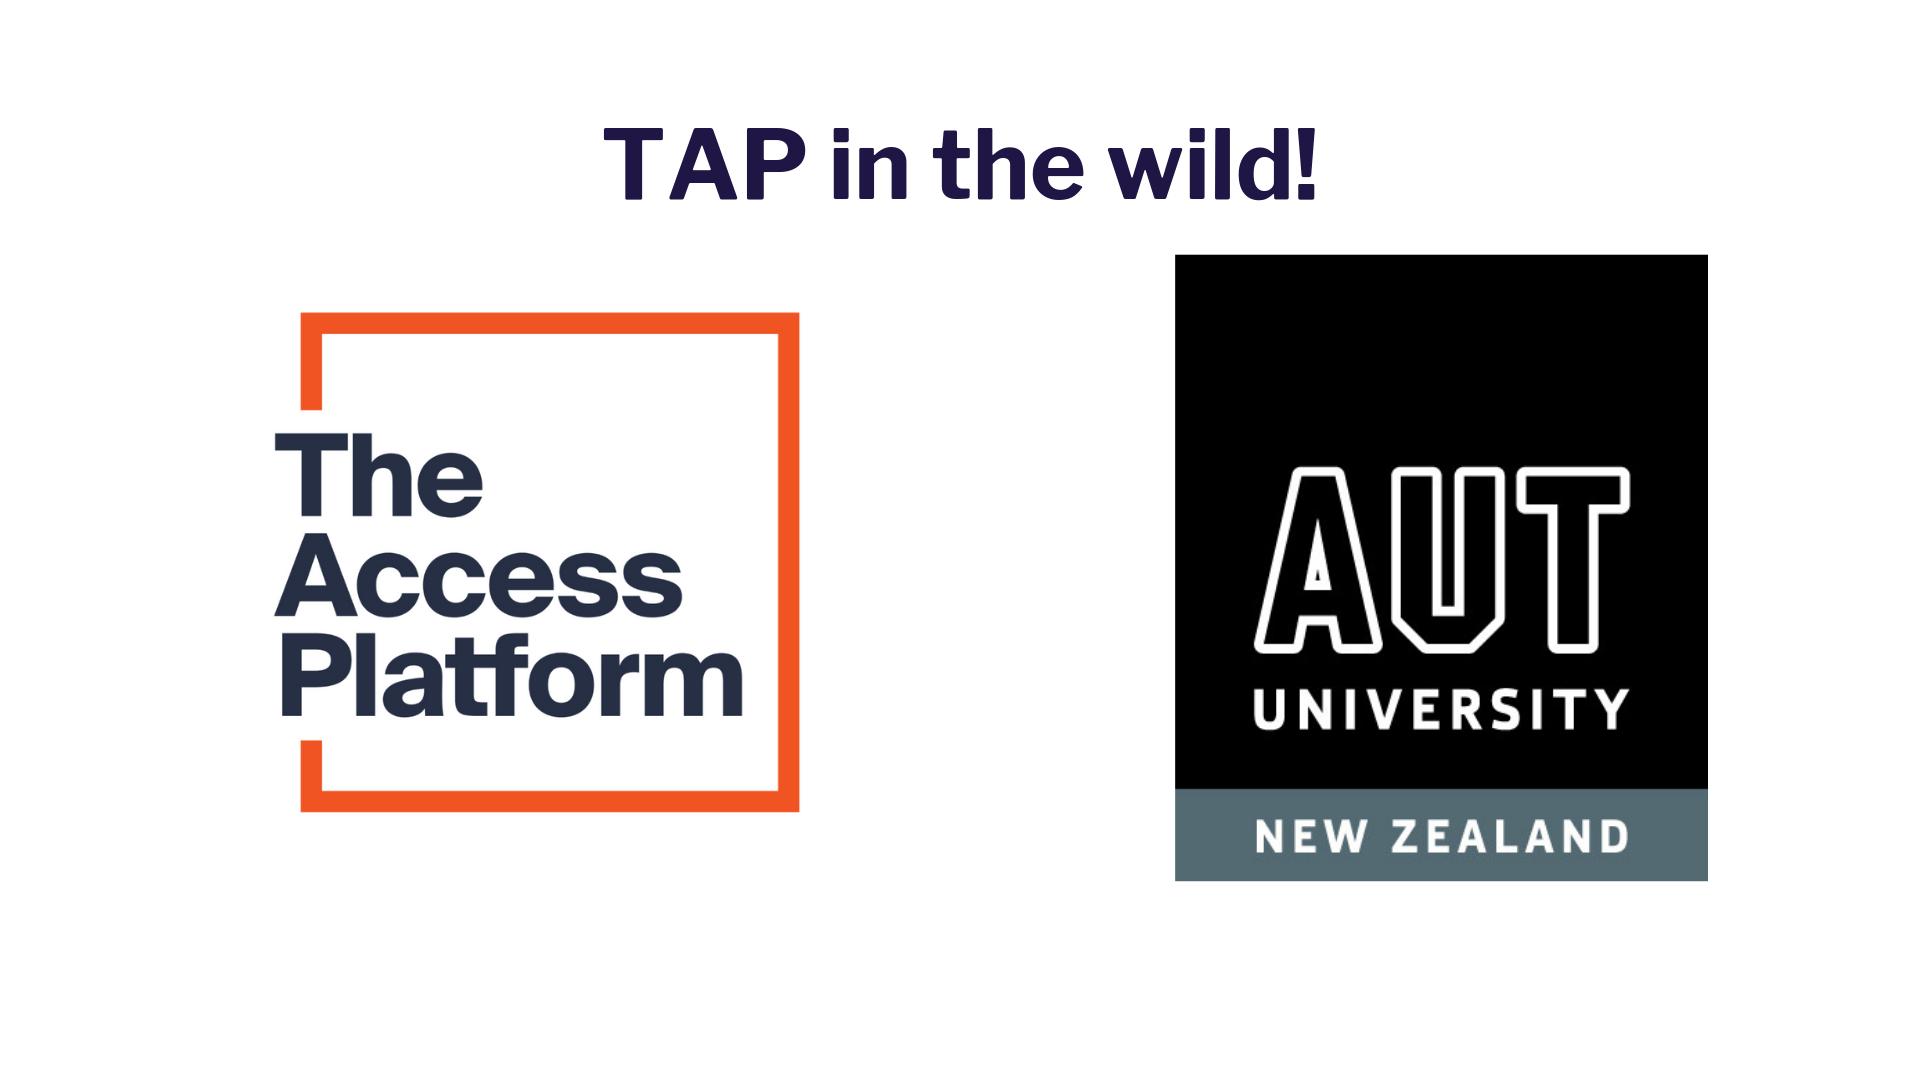 TAP in the wild: Auckland University of Technology